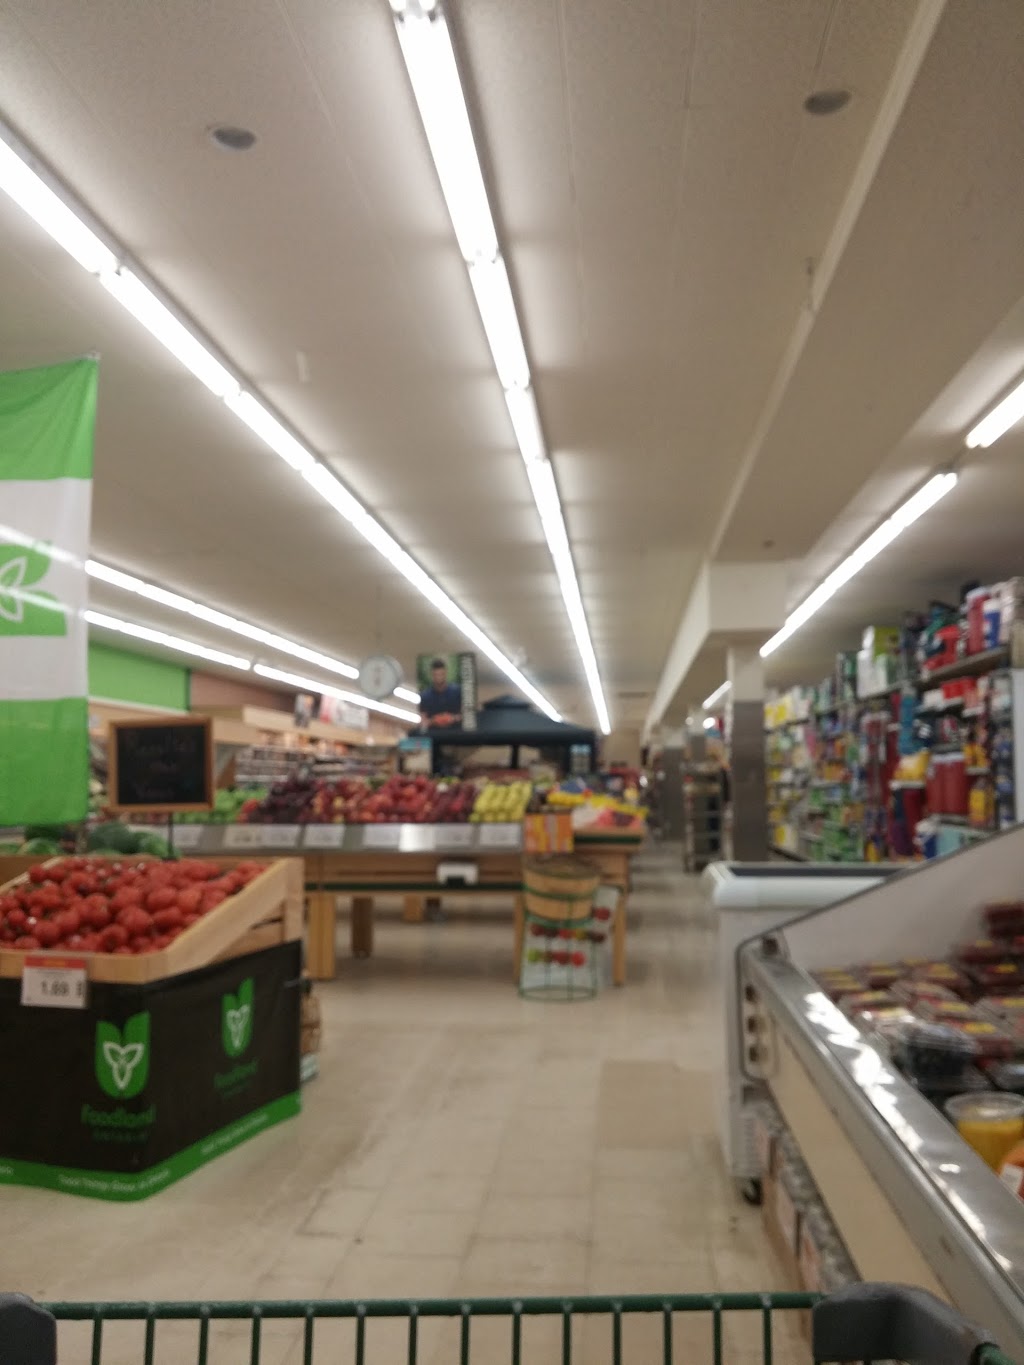 Alfreds Valu-mart | 512 St-Philippe St, Alfred, ON K0B 1A0, Canada | Phone: (613) 679-2578